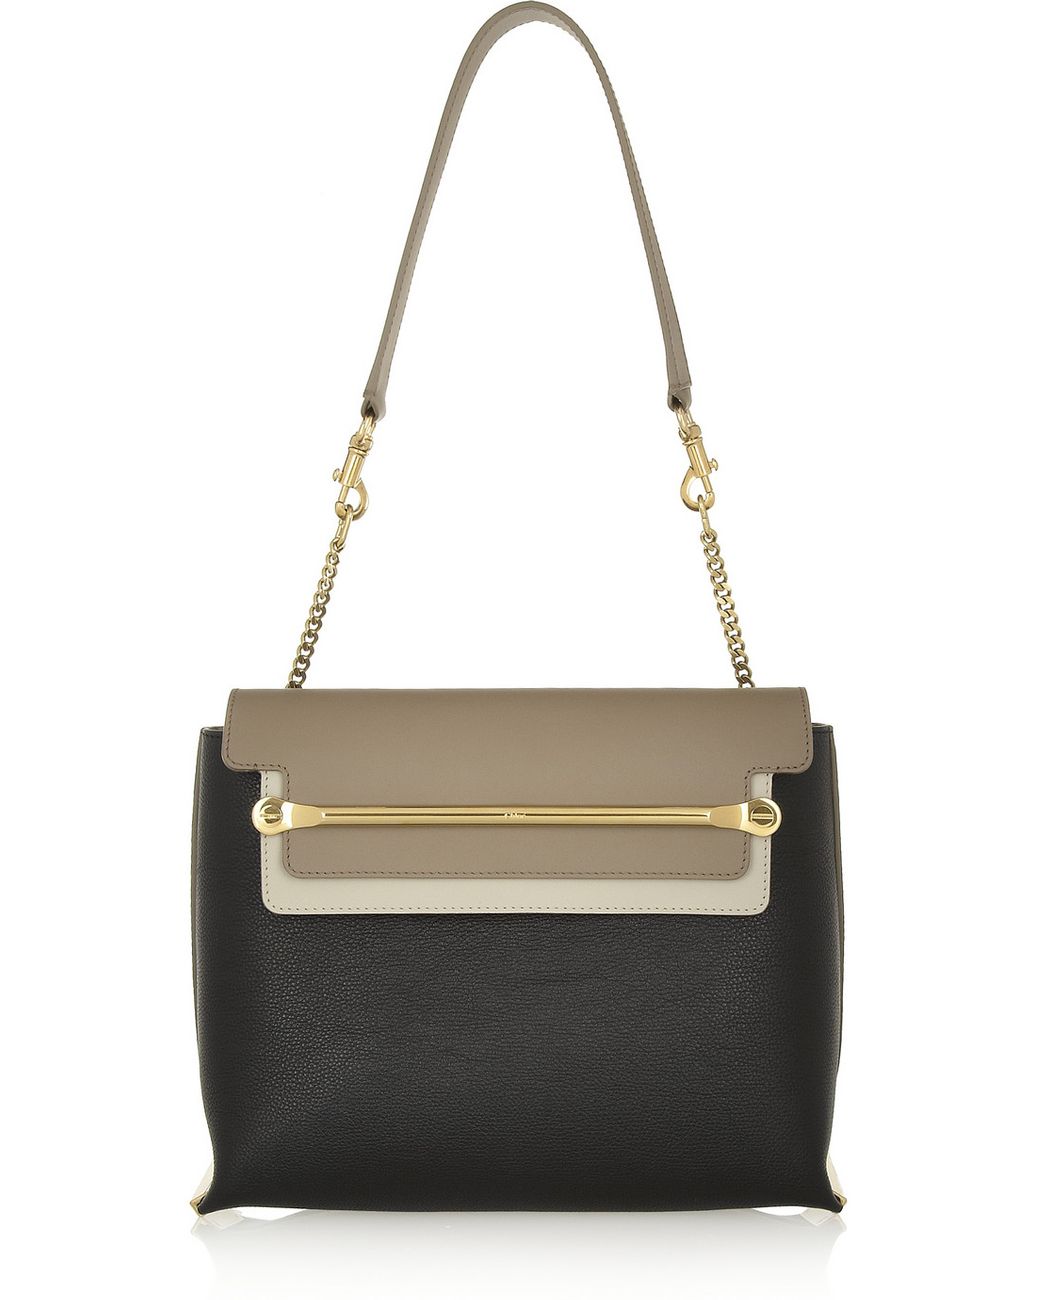 Chloé Clare Small Leather Shoulder Bag in Black | Lyst